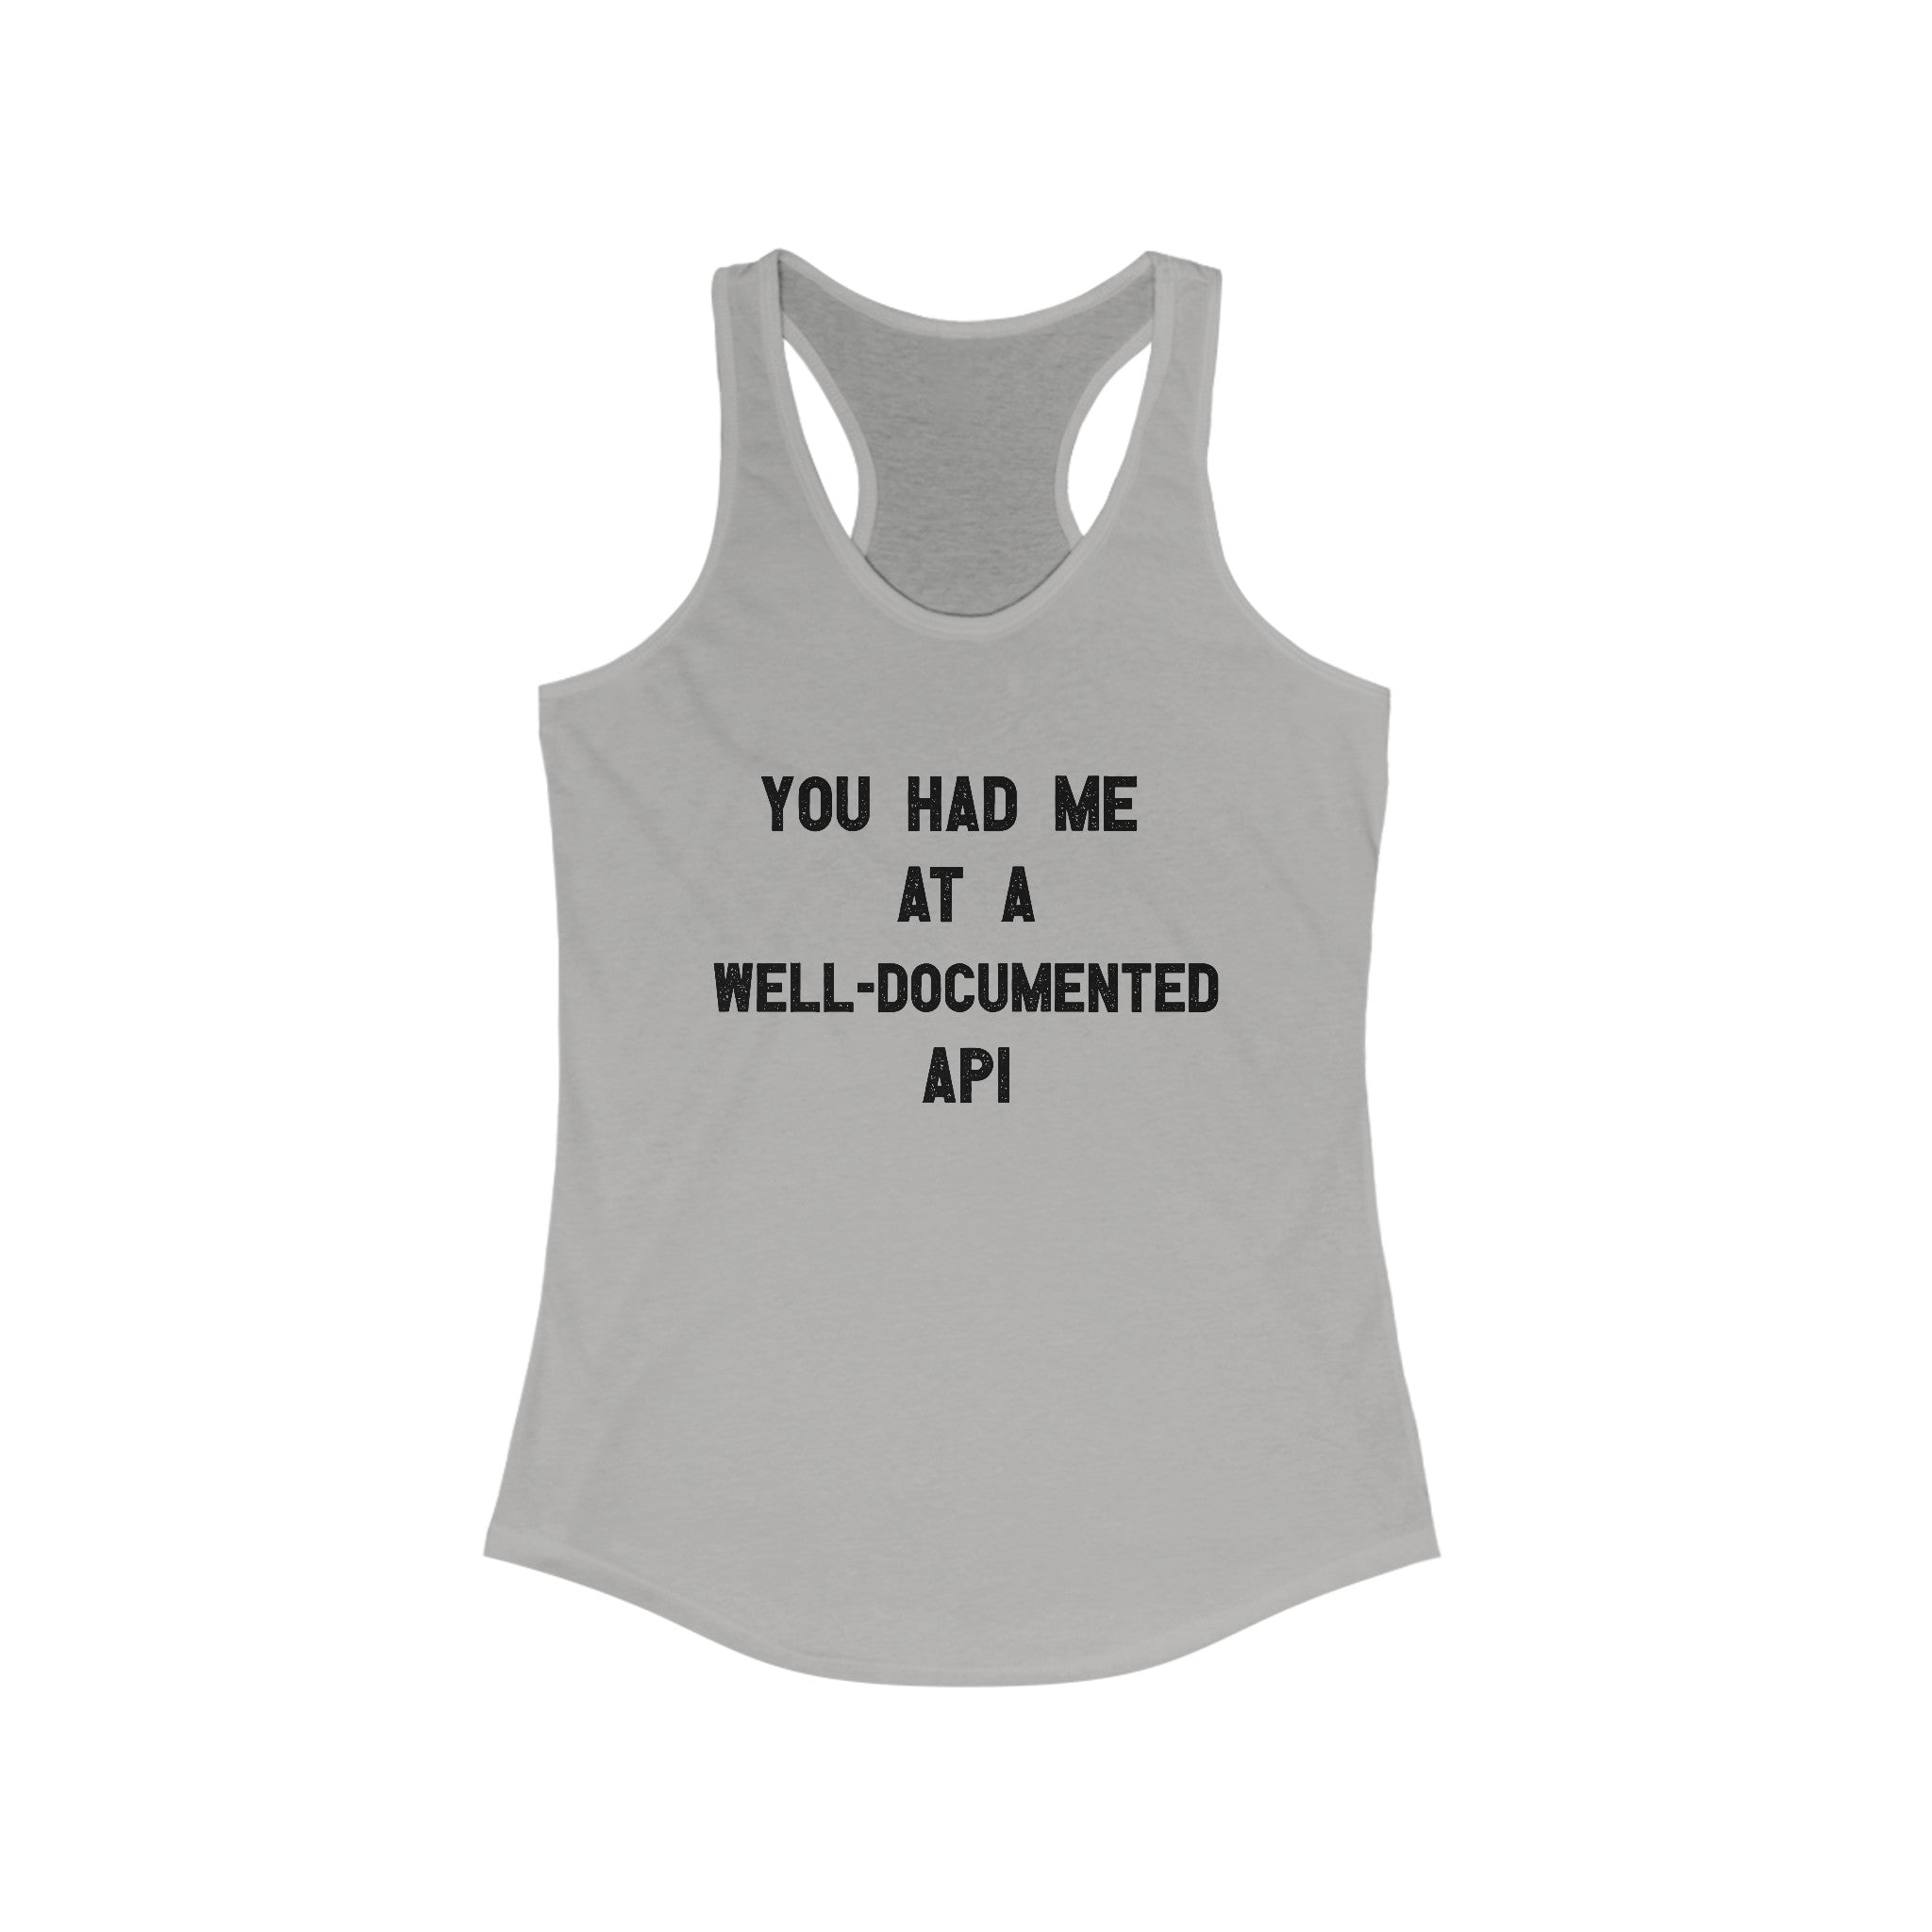 You Had Me At A Well-Documented API - Women's Racerback Tank